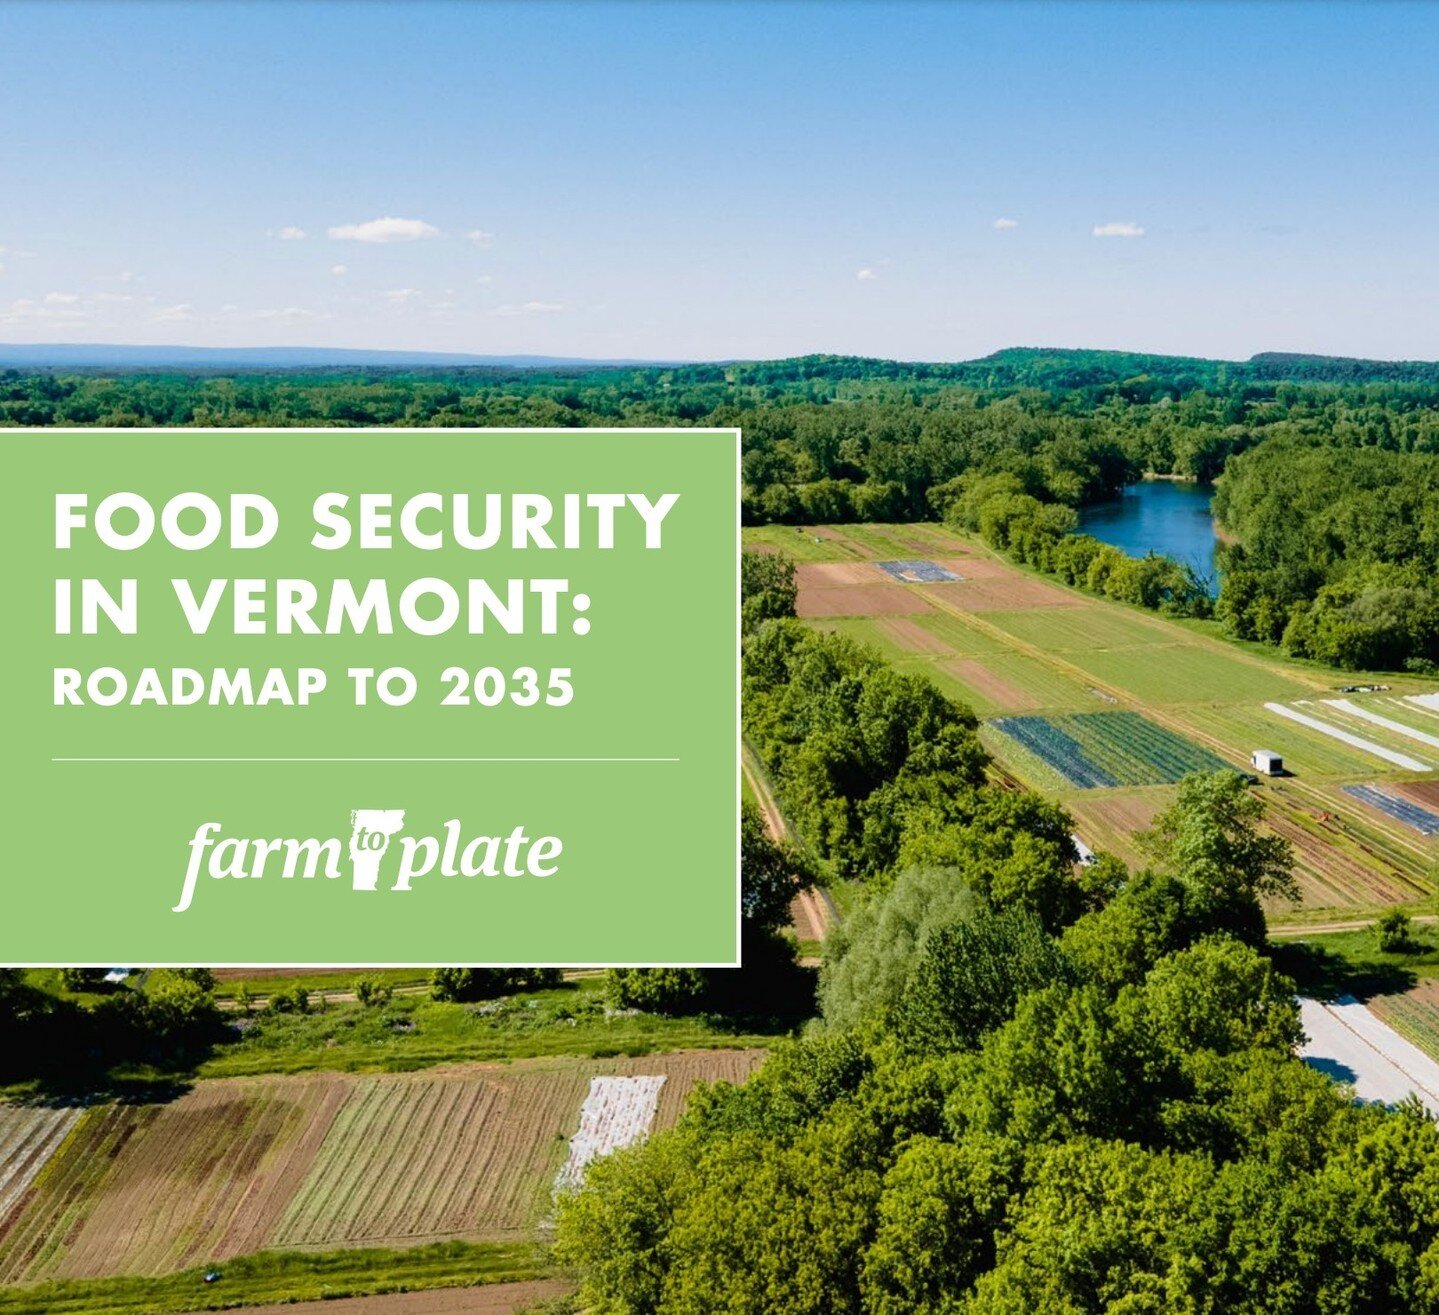 Hunger Free Vermont, the Vermont Hunger Councils and Vermont Farm to Plate Network are on a mission to ensure all Vermonters are food secure by 2035. 

Join us at one of 10 local events to explore the Vermont Food Security Roadmap to 2035 and the pat